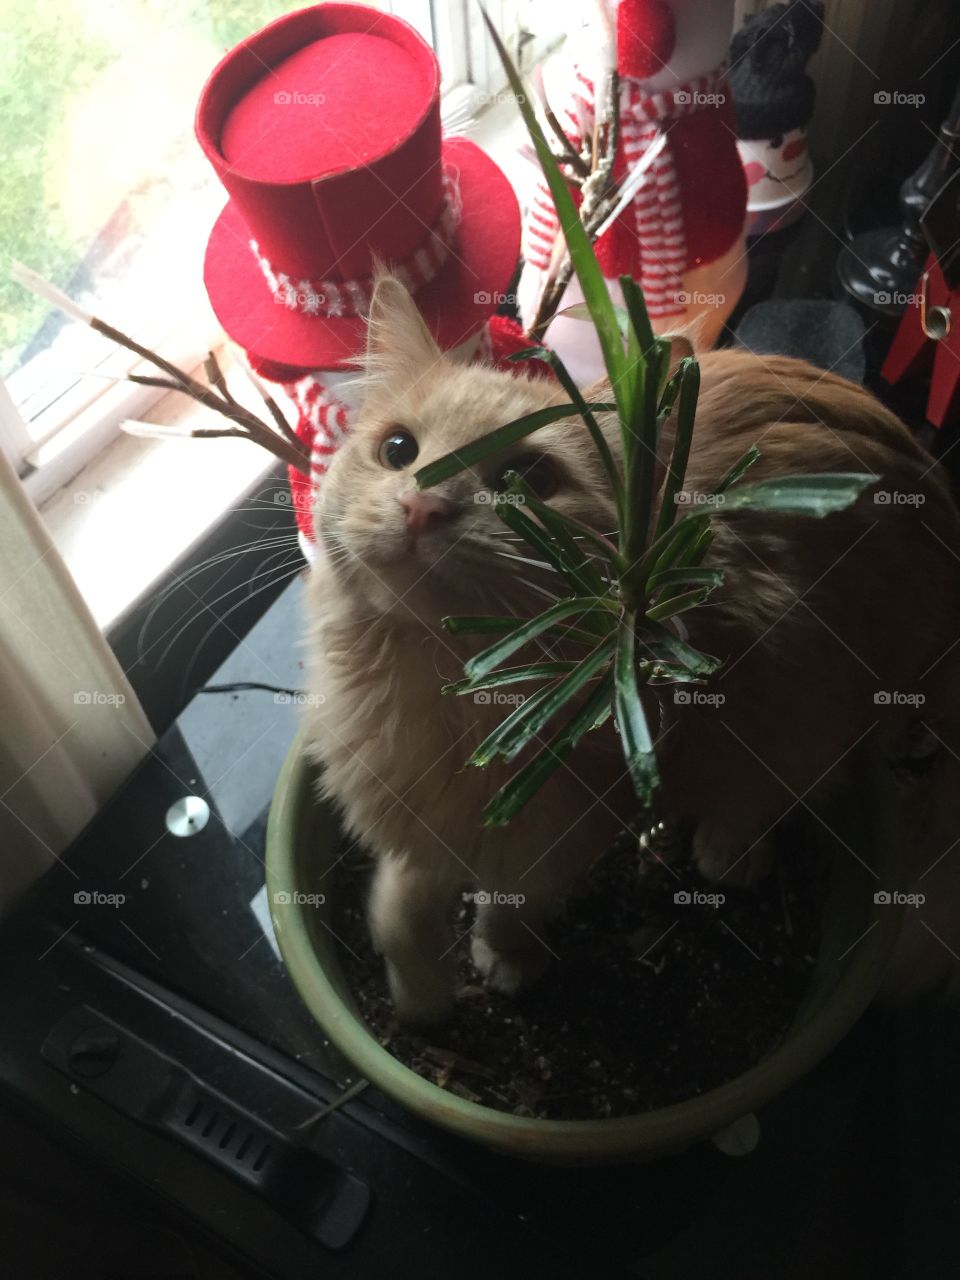 Wonder who ate the plant